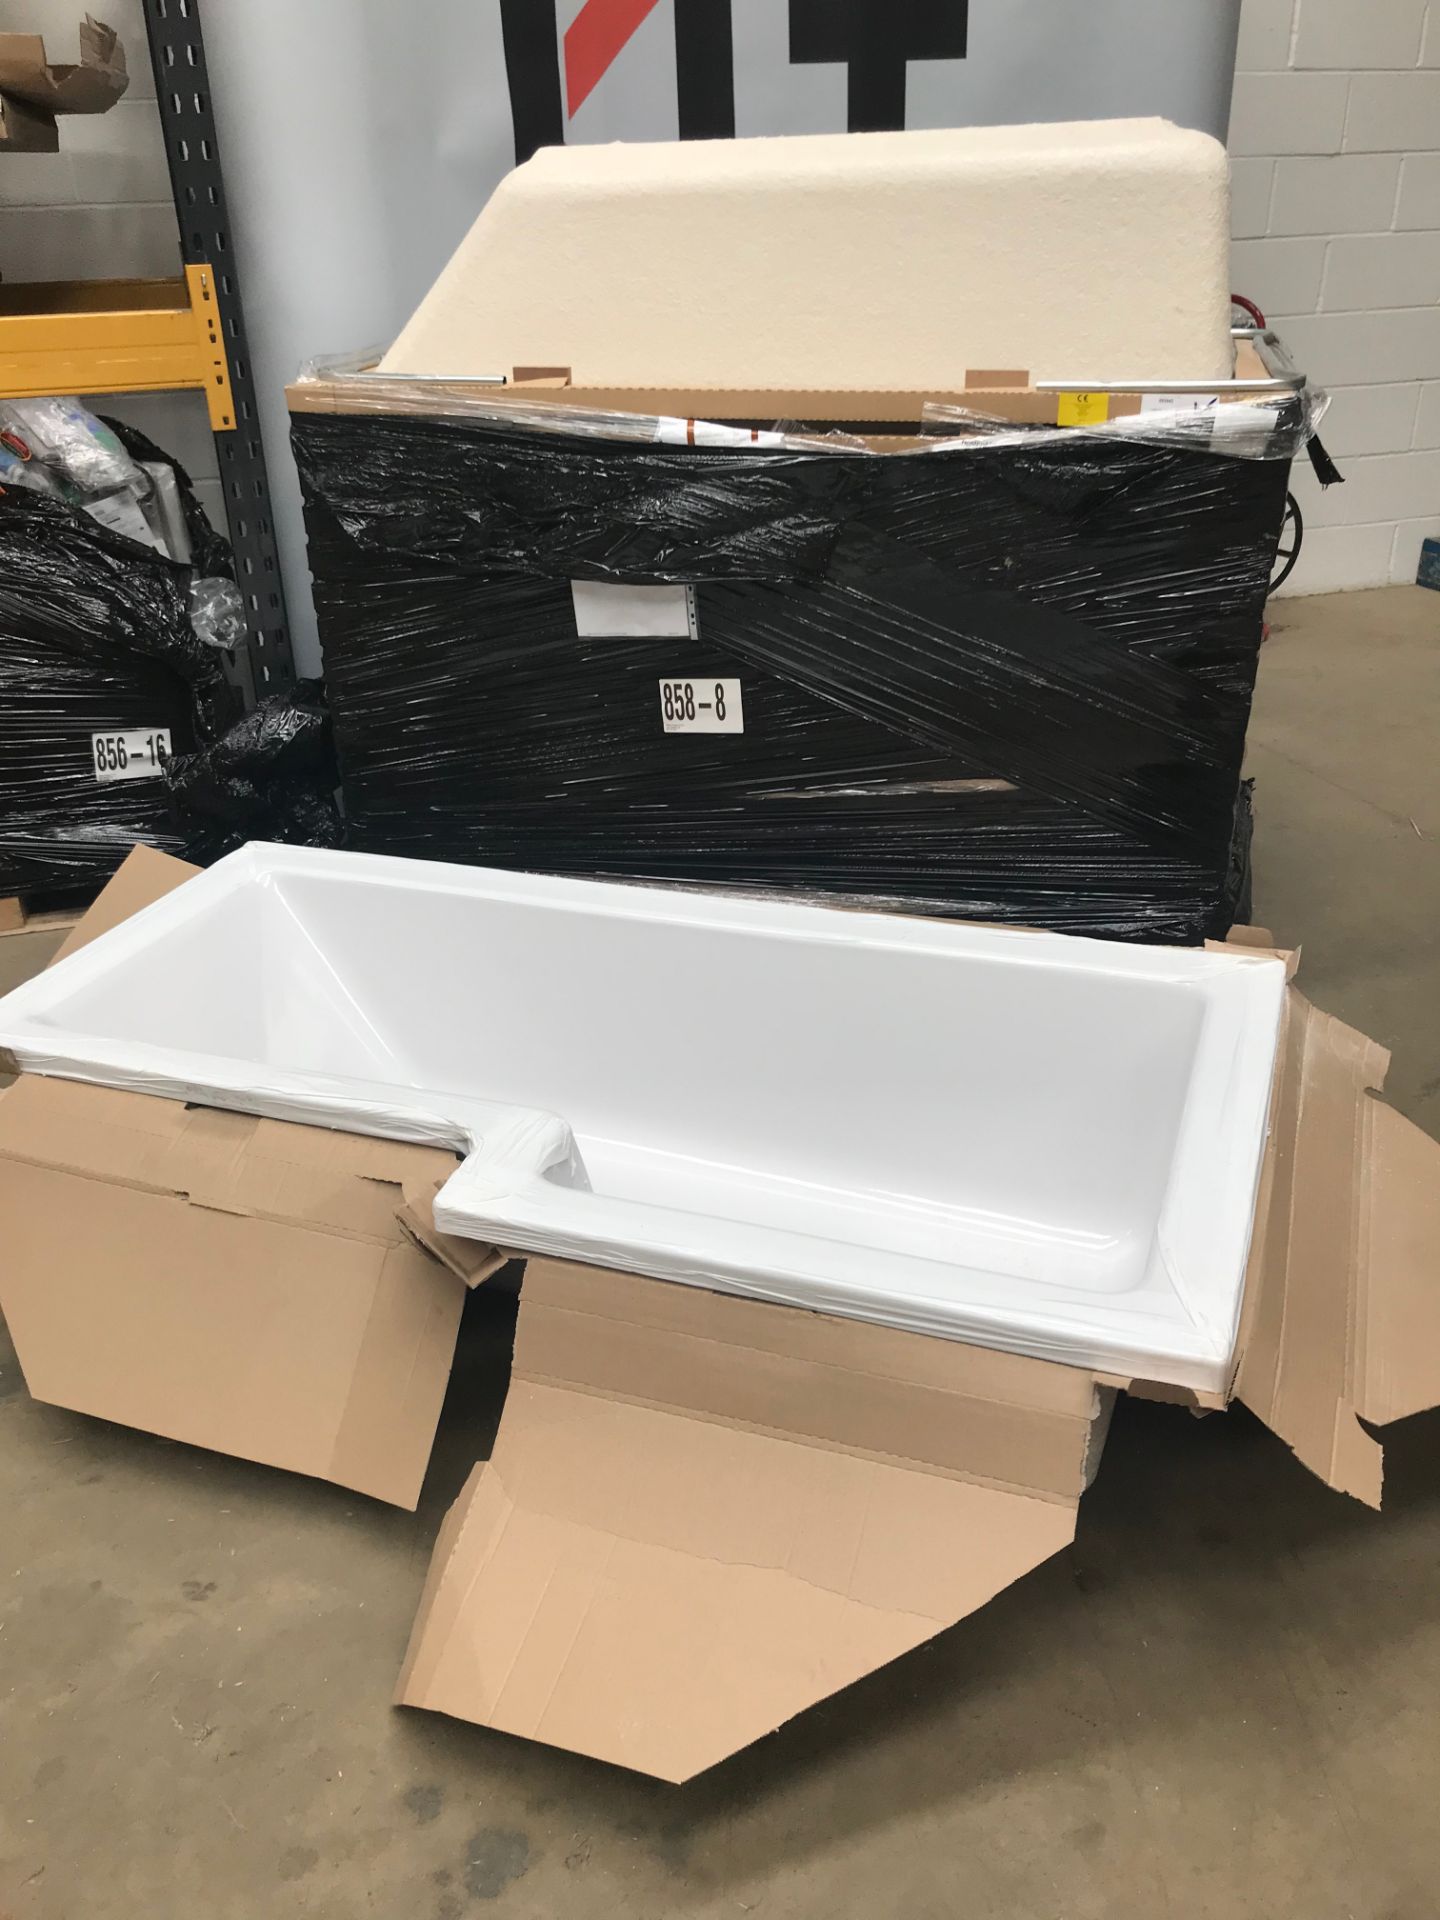 Pallet of 15 x Emberton Shower Bath - Right Hand - Image 11 of 11